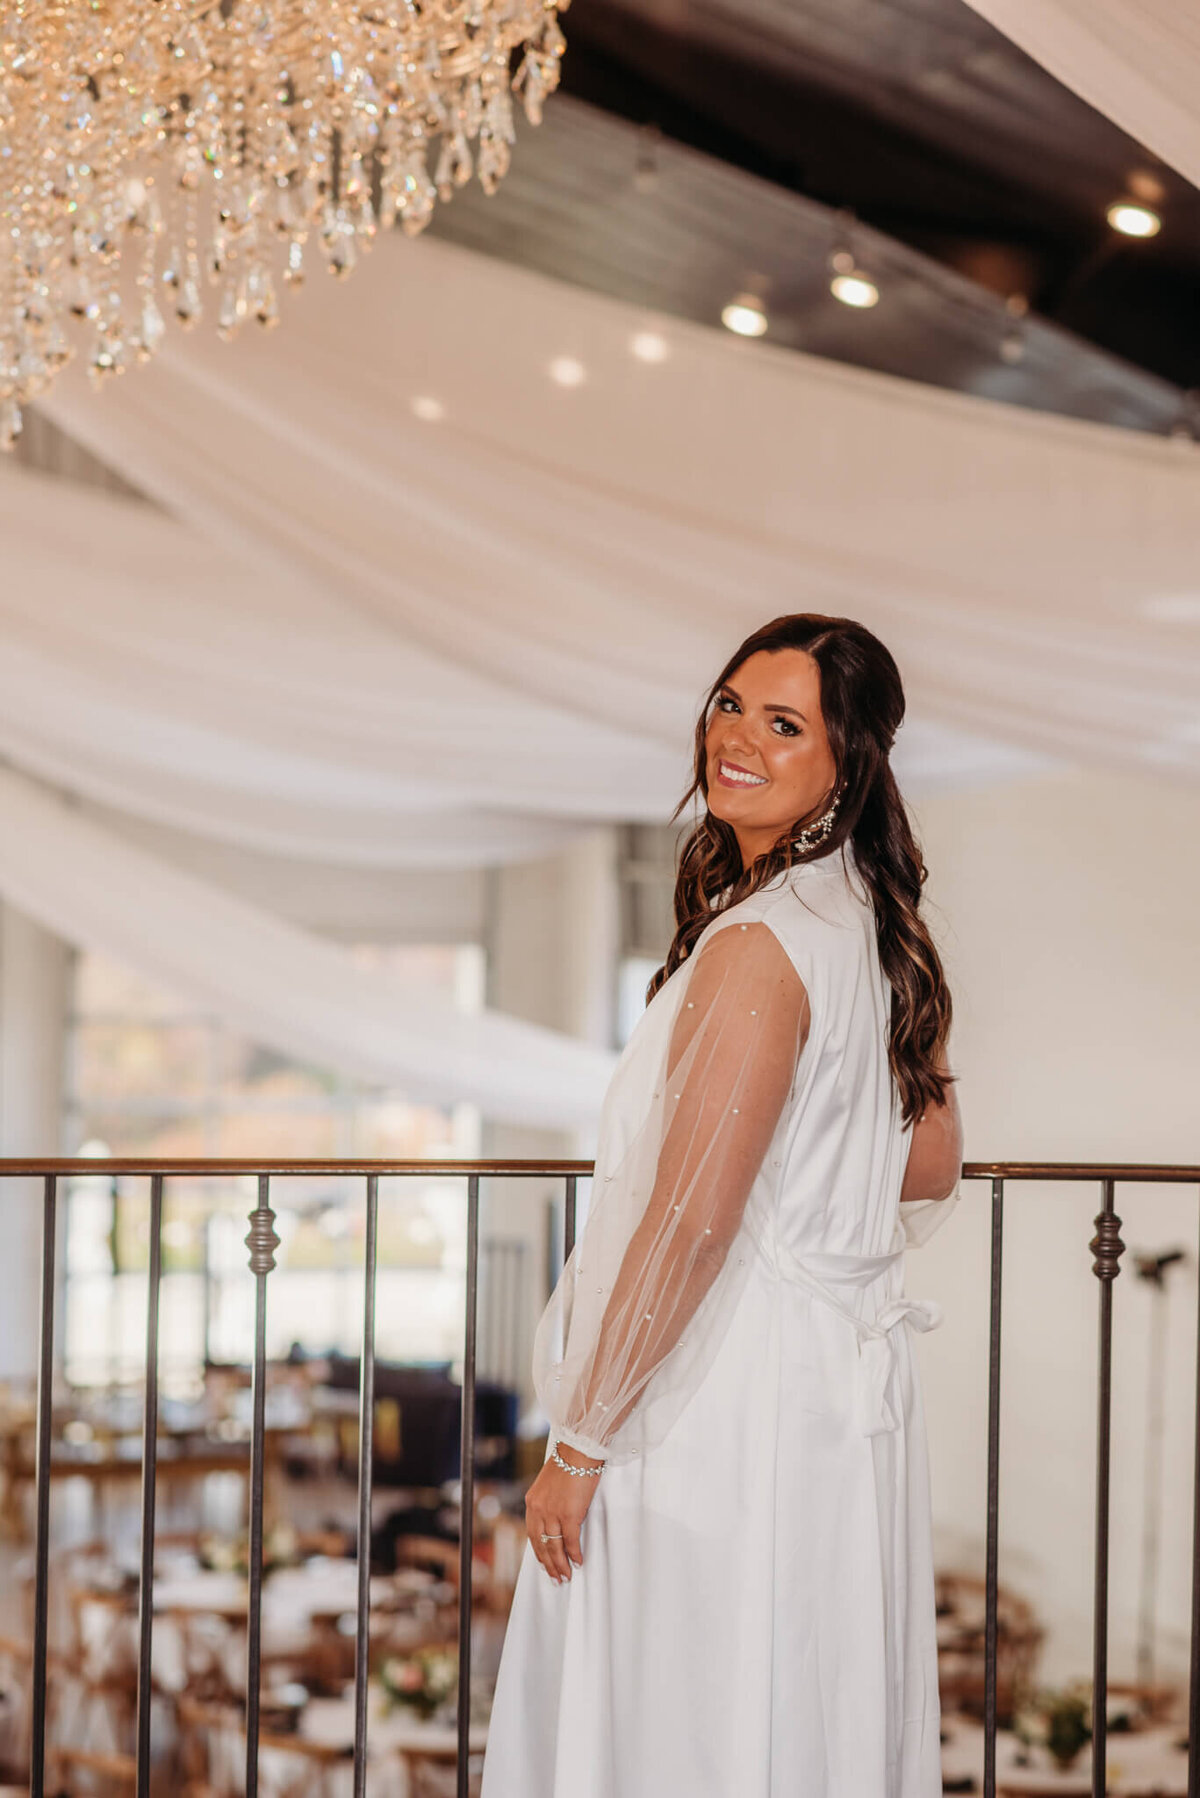 photo Of a bride in a white robe standing on a balcony with a chandelier in the background